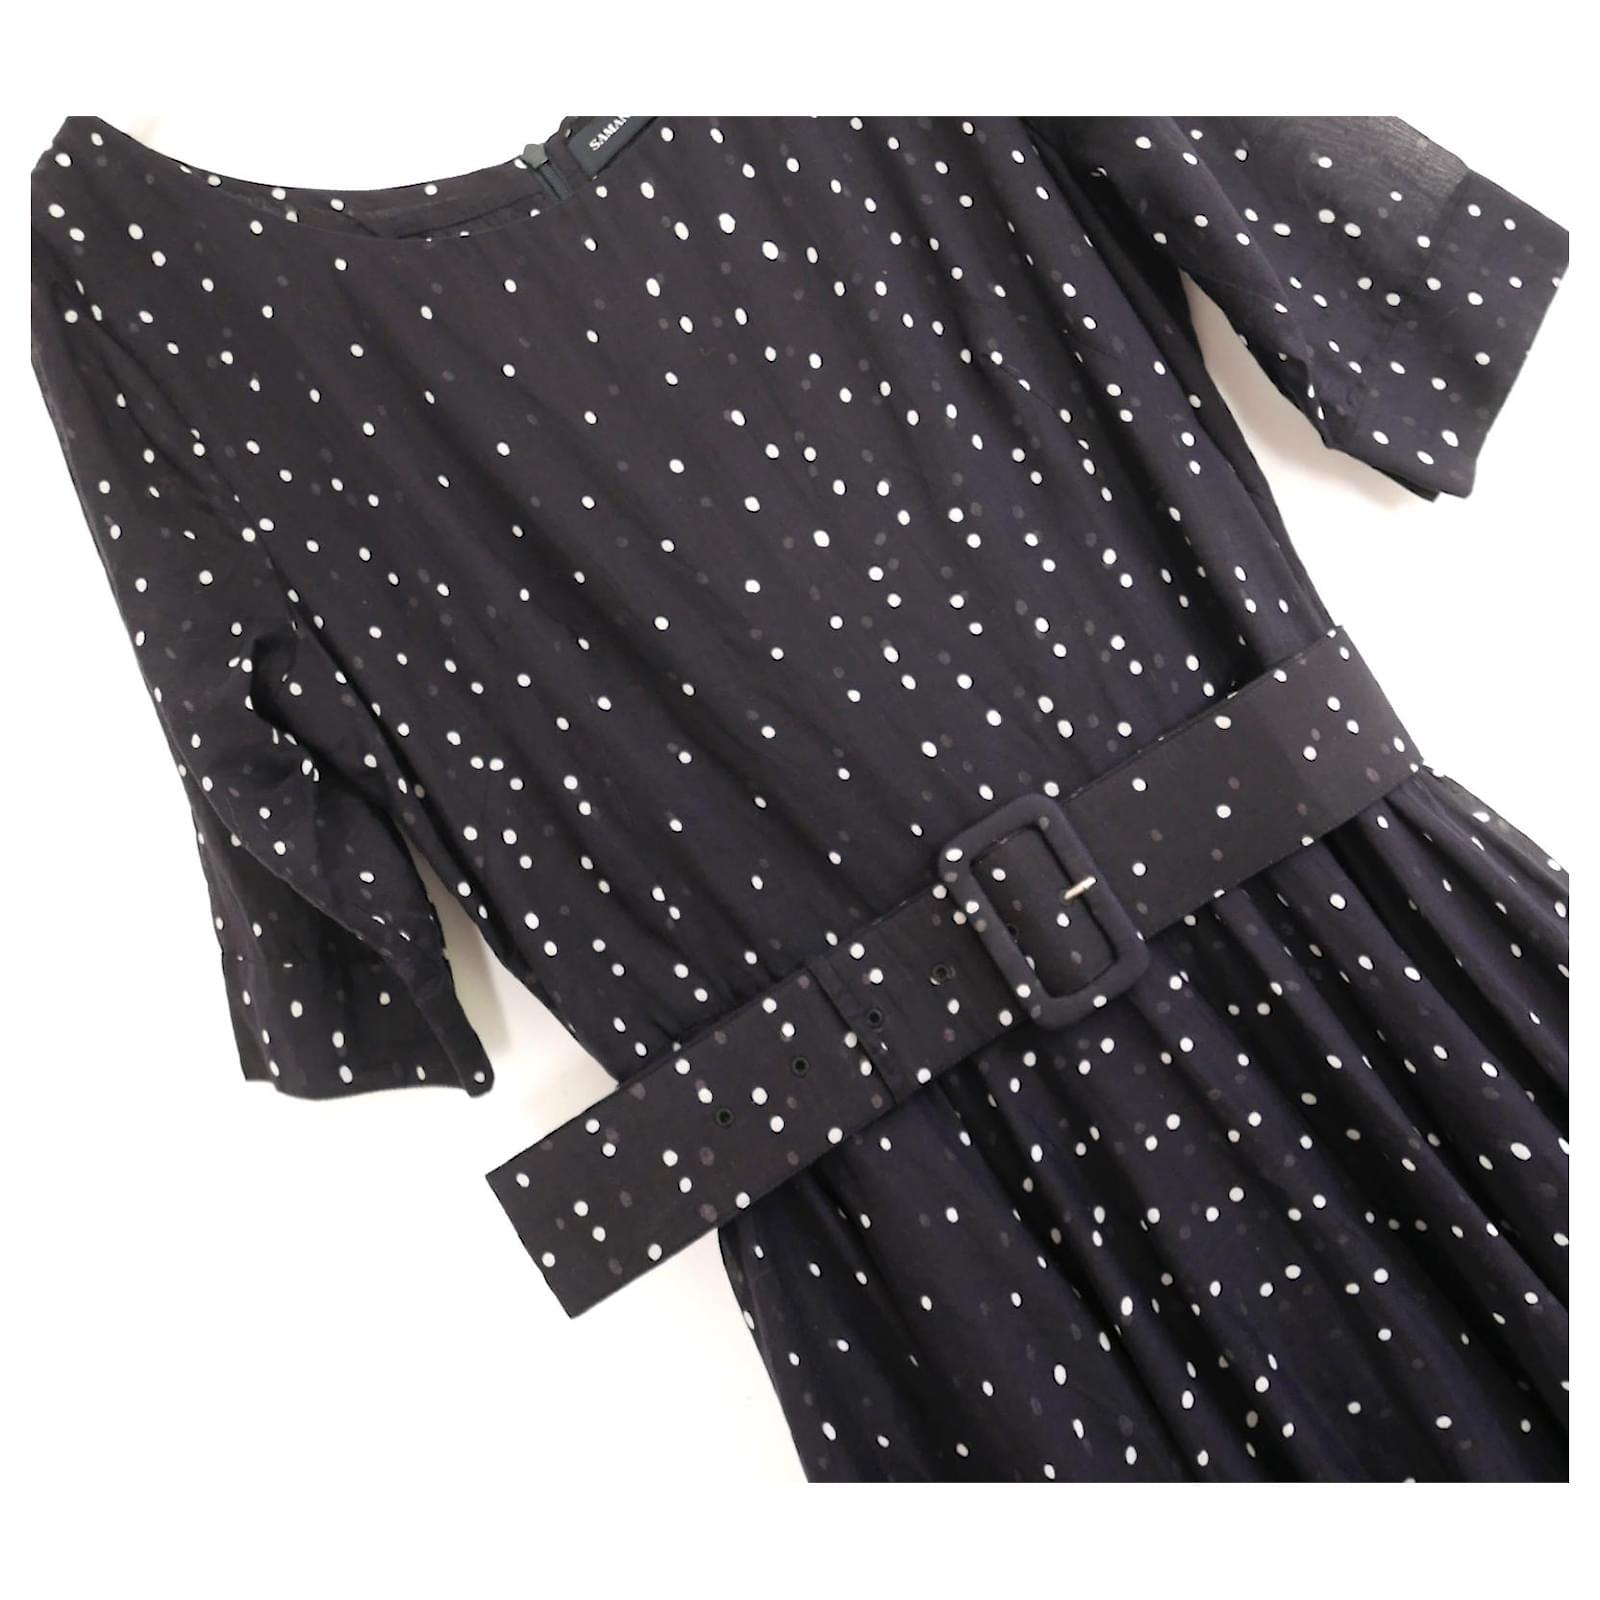 Utterly charming vintage inspired Samantha Sung Florance dress from Samantha Sung. Bought for $1075 and unworn. Made from two layers of ultra soft navy and white polka dot cotton Musola cotton with 3% spandex, It has a super flattering 1950s fit and